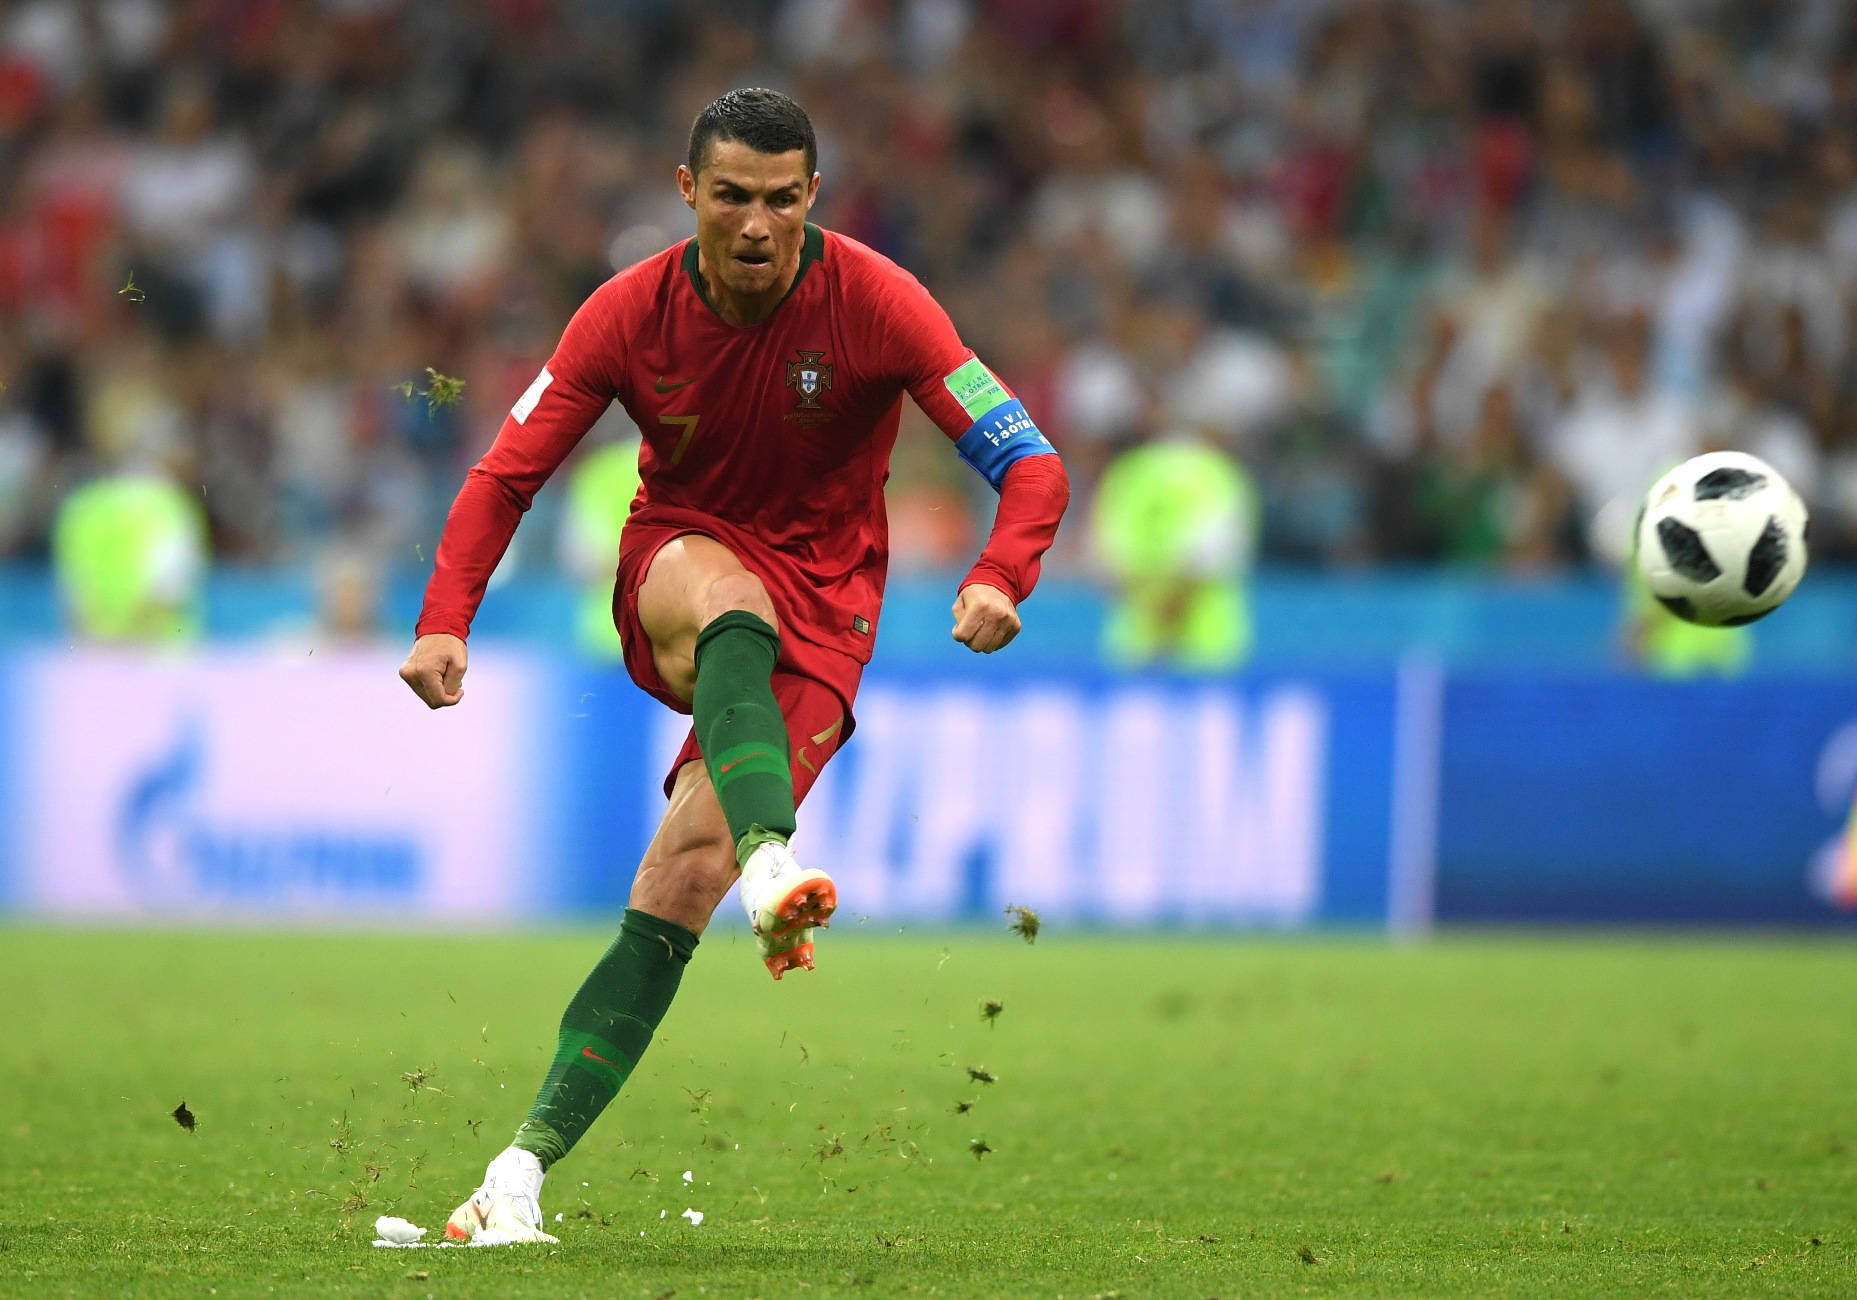 Cristiano Ronaldo Cool Football Superstar Mid Kick Action Picture